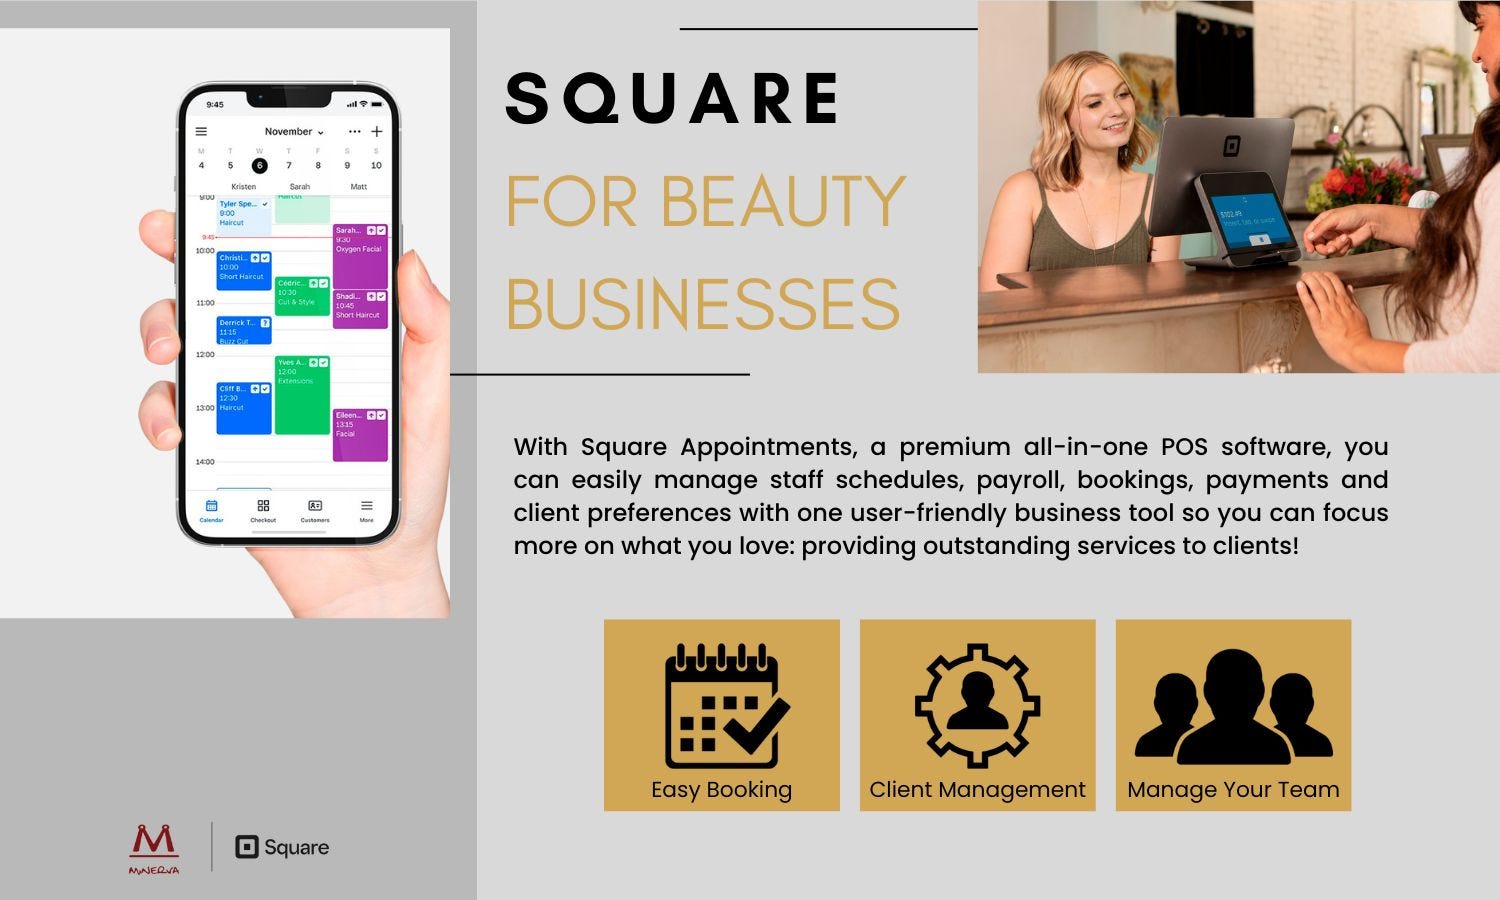 Square for beauty businesses helps salon owners make a price list by providing average prices for salon services